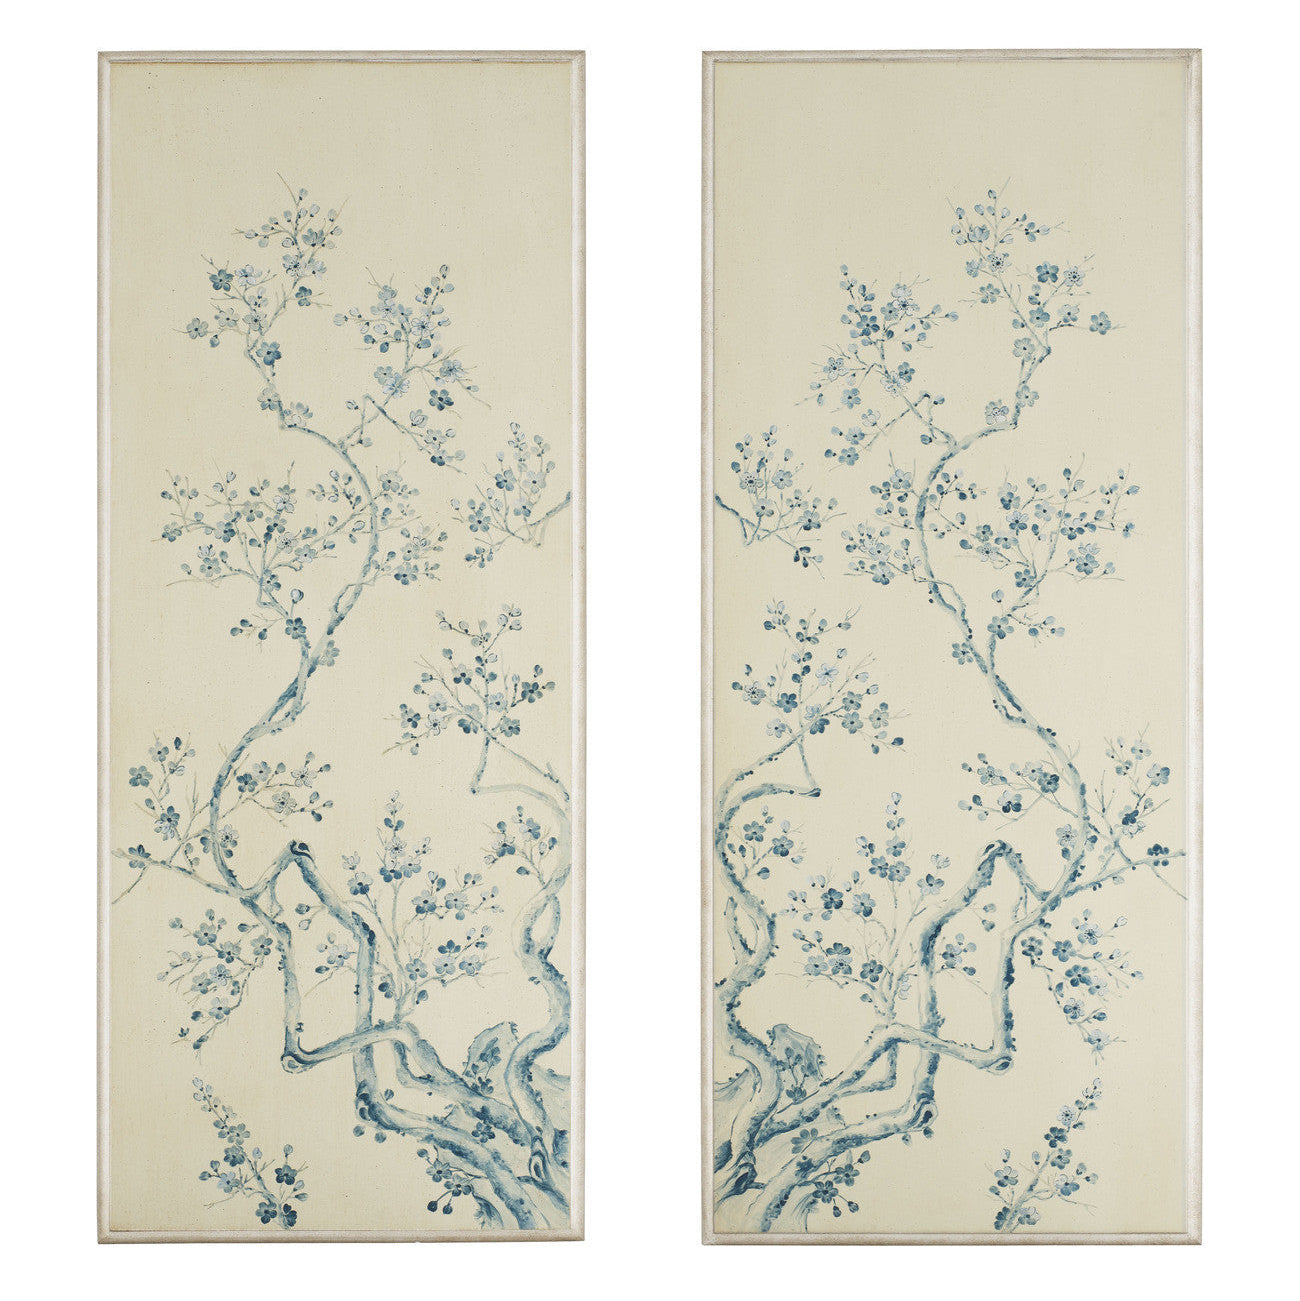 Blue and White Floreal Wall Panels, Melea Markell